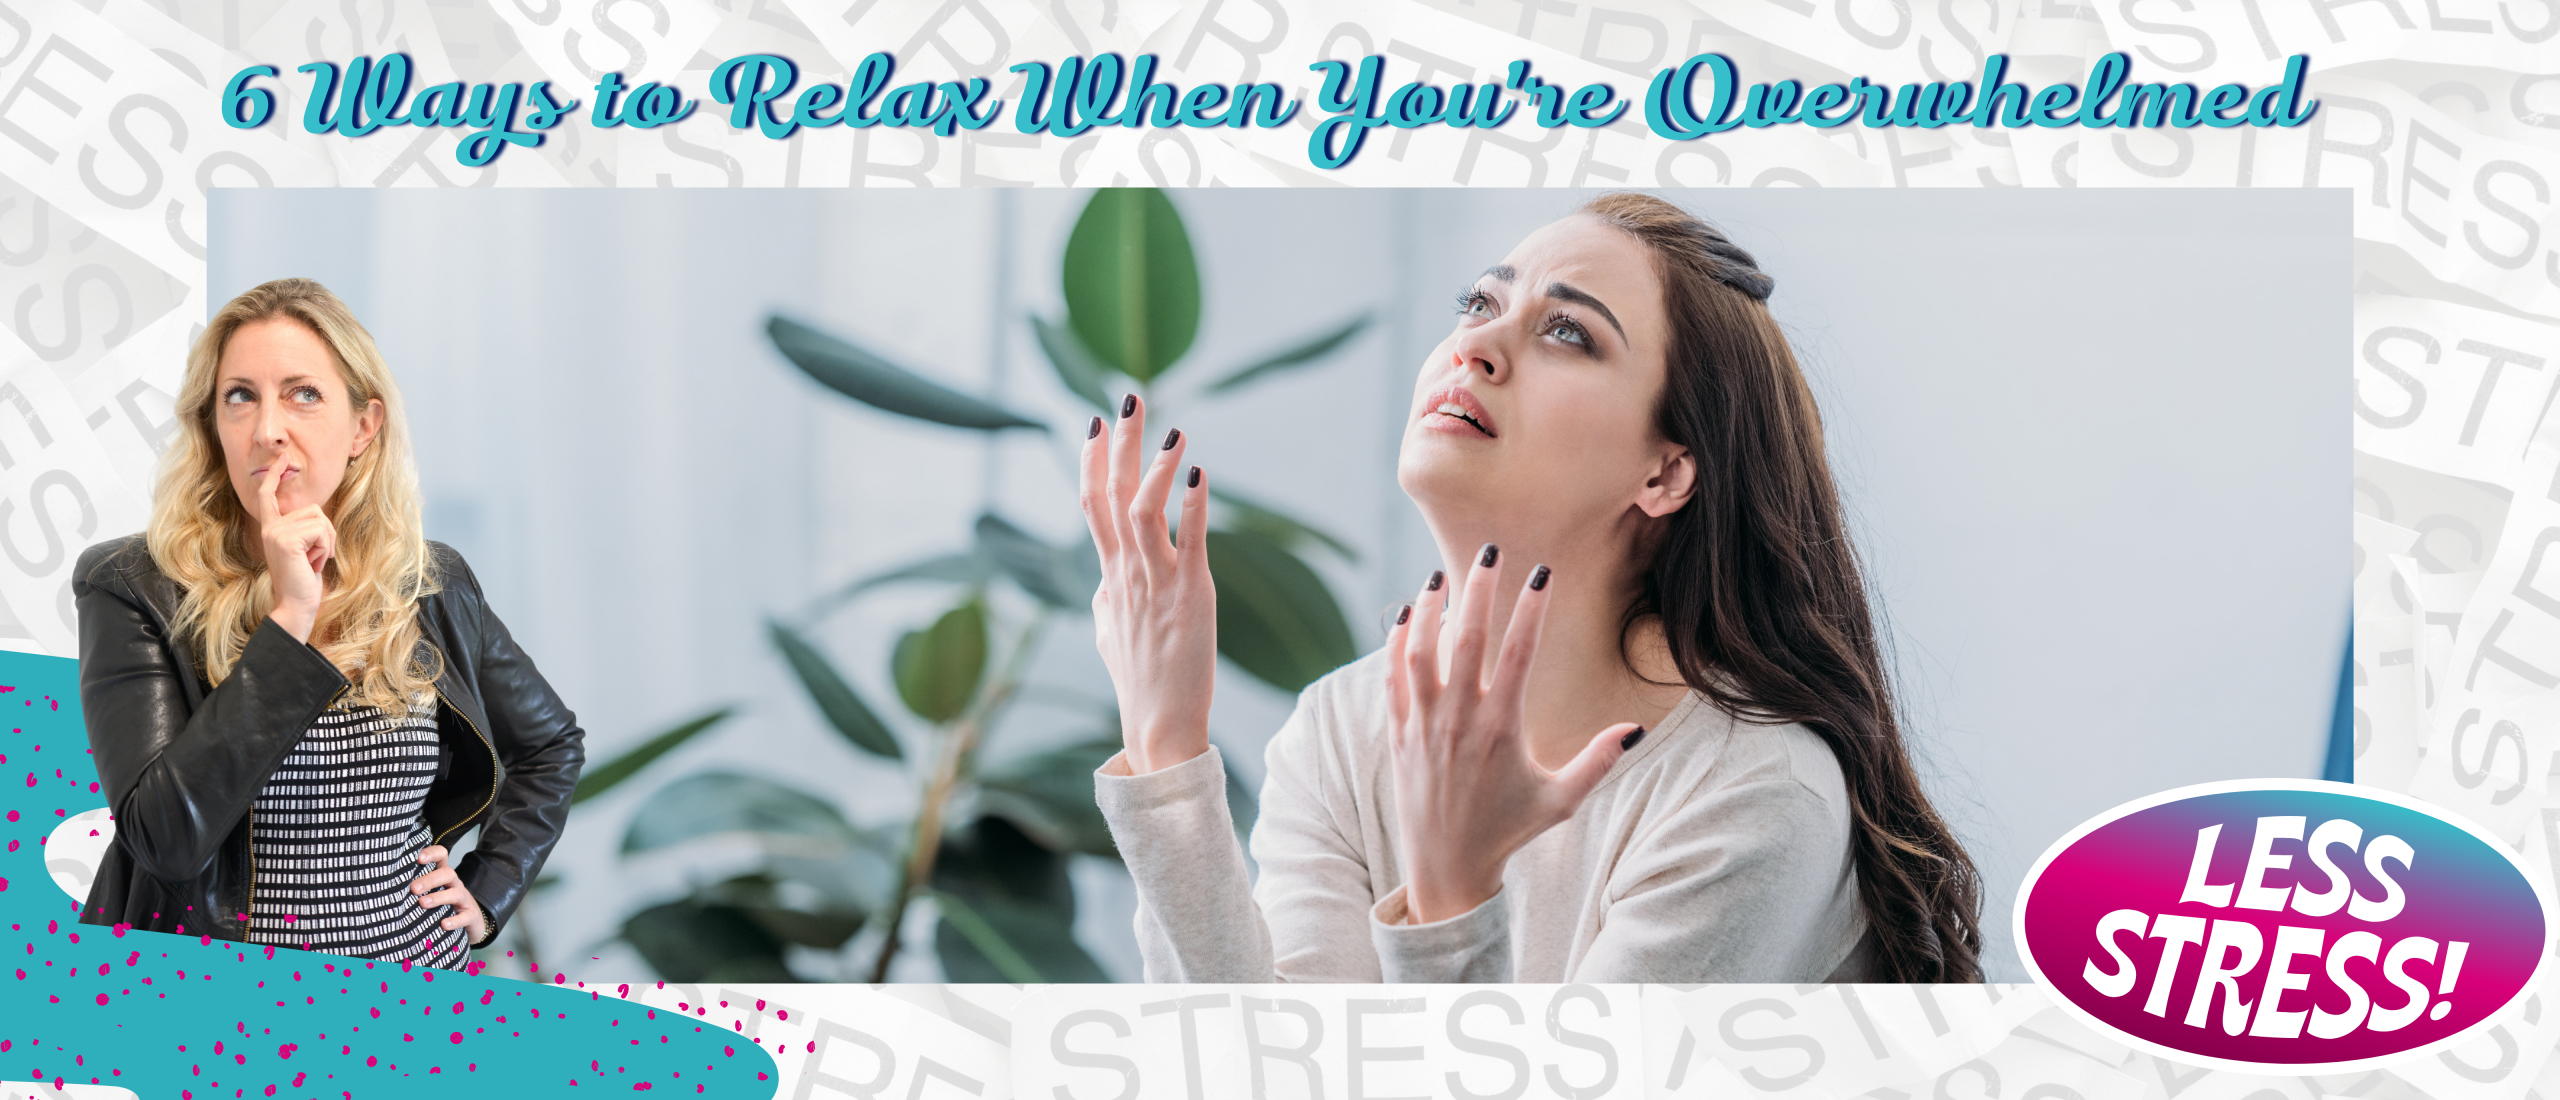 6 Ways to Relax When You’re Overwhelmed